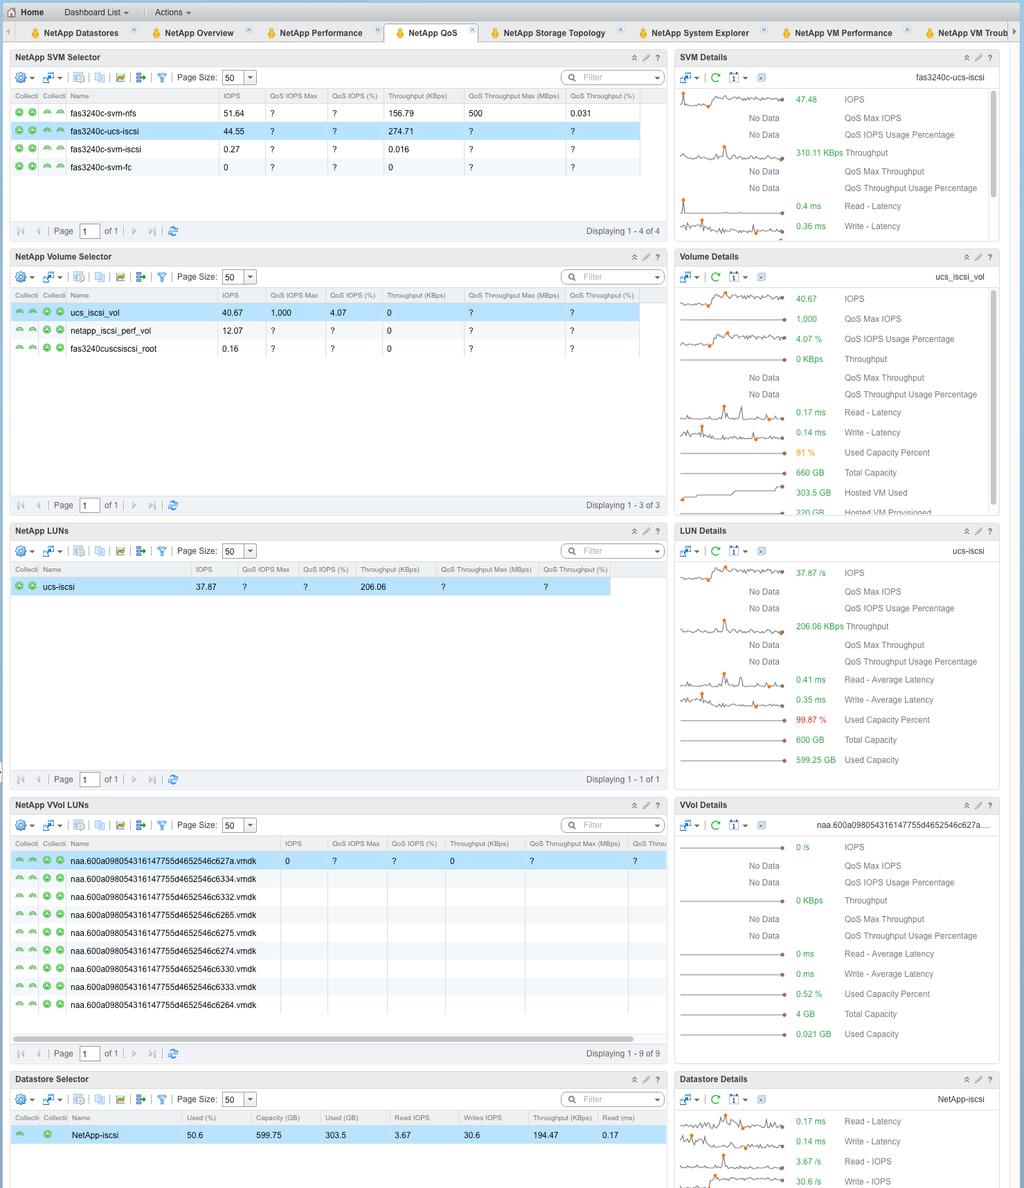 3.6 NetApp QoS The NetApp QoS dashboard displays Quality of Service (QoS) performance details for Storage s (SVMs), volumes, LUNs, VVOL LUNs, and